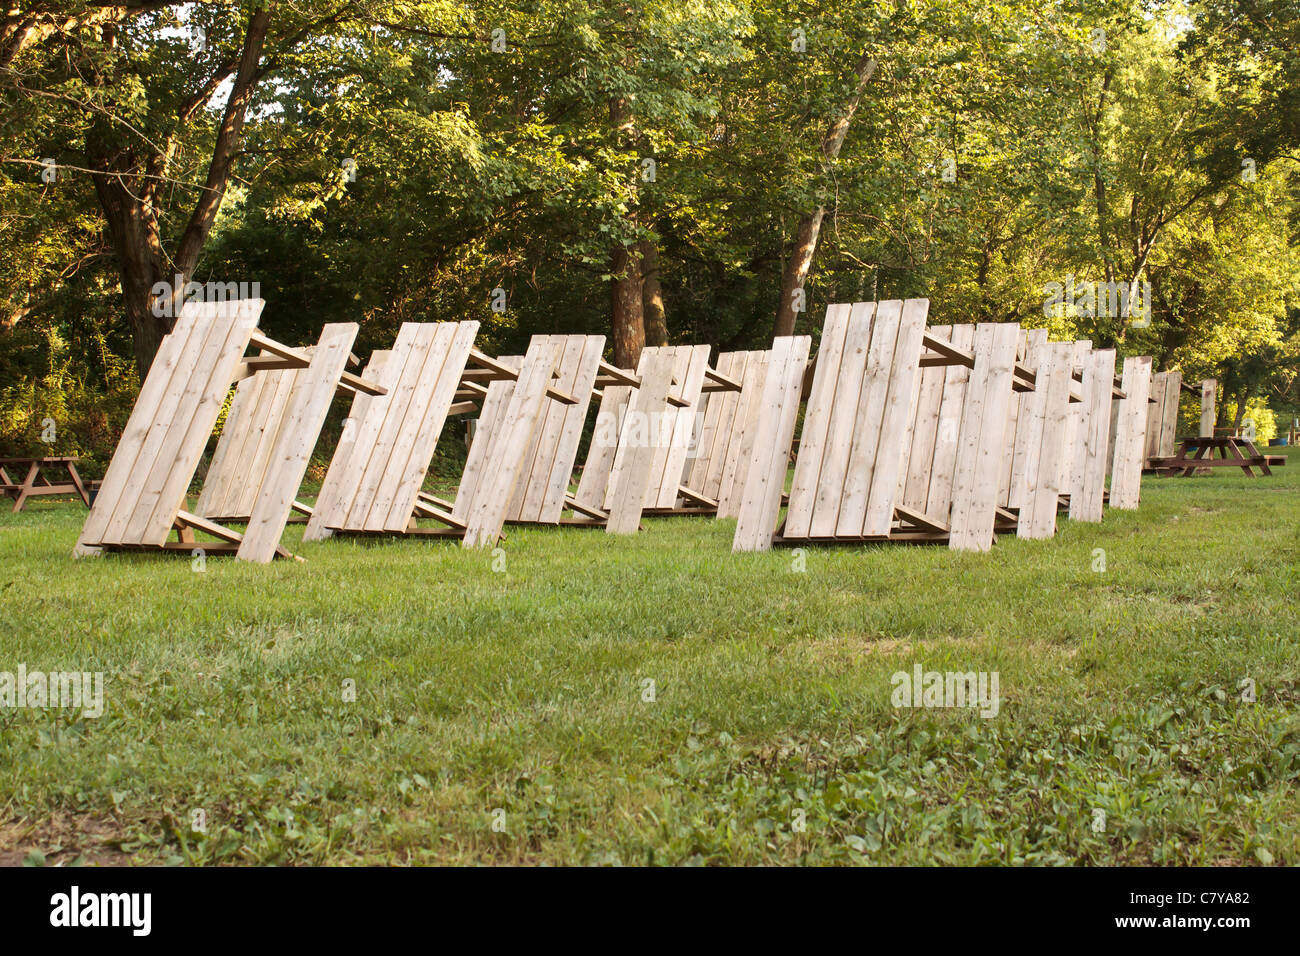 Rows of picnic tables standing up in a camping park setting Stock Photo